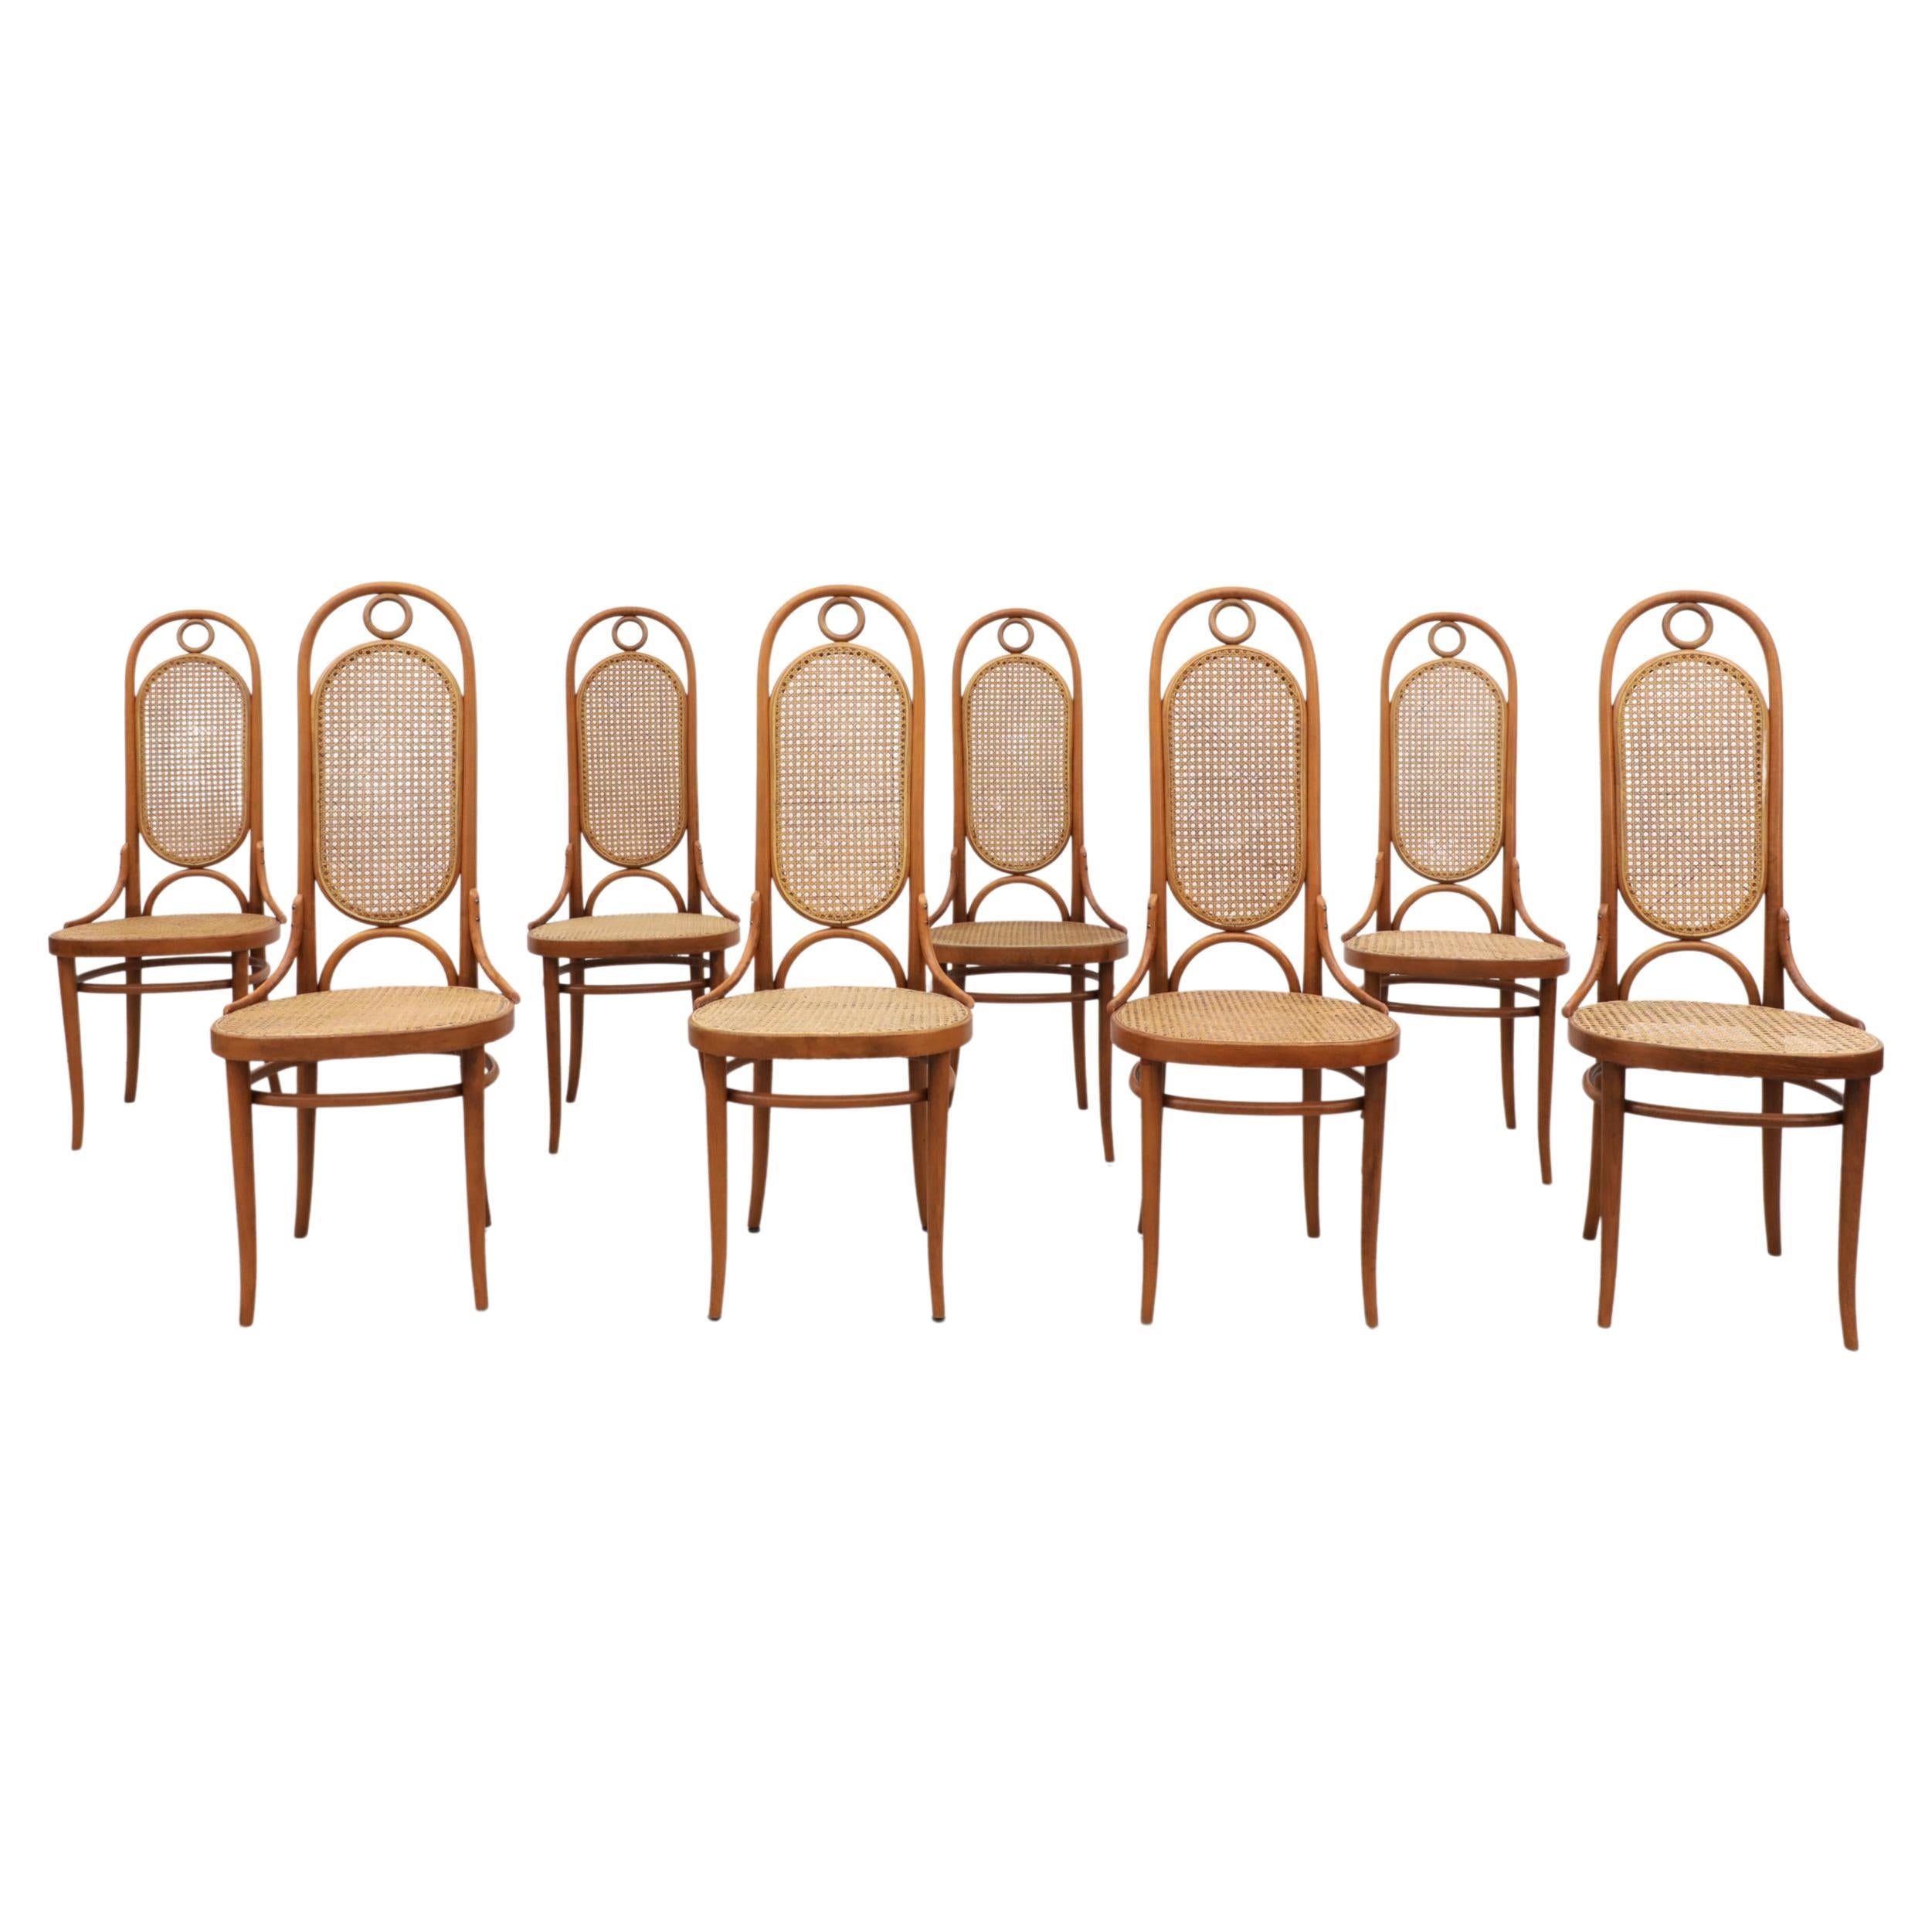 Set of 8 Thonet N.17 High Back Bentwood Chairs